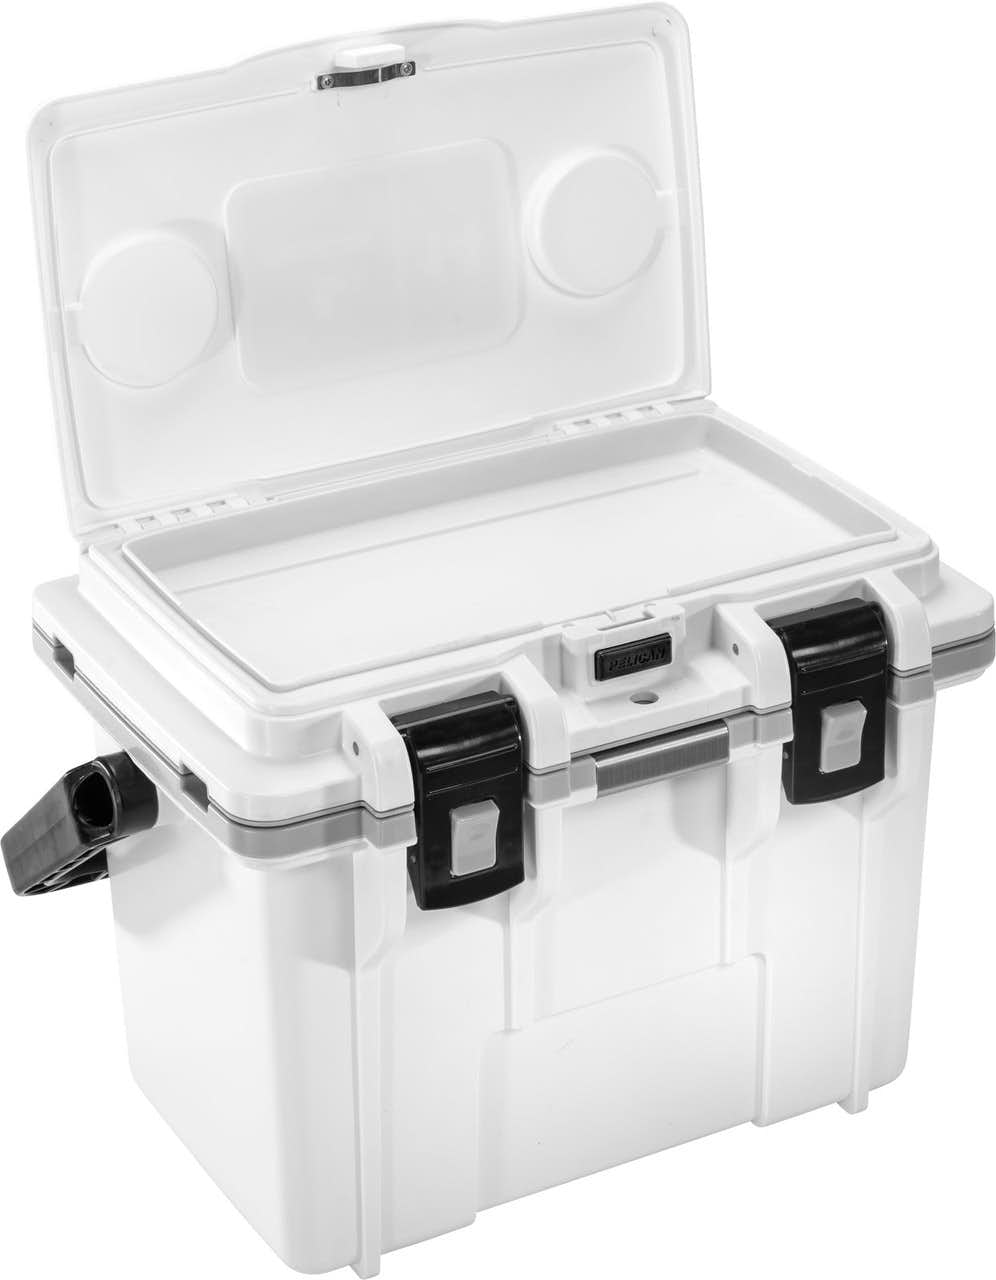 Personal Cooler 14QT White/Grey